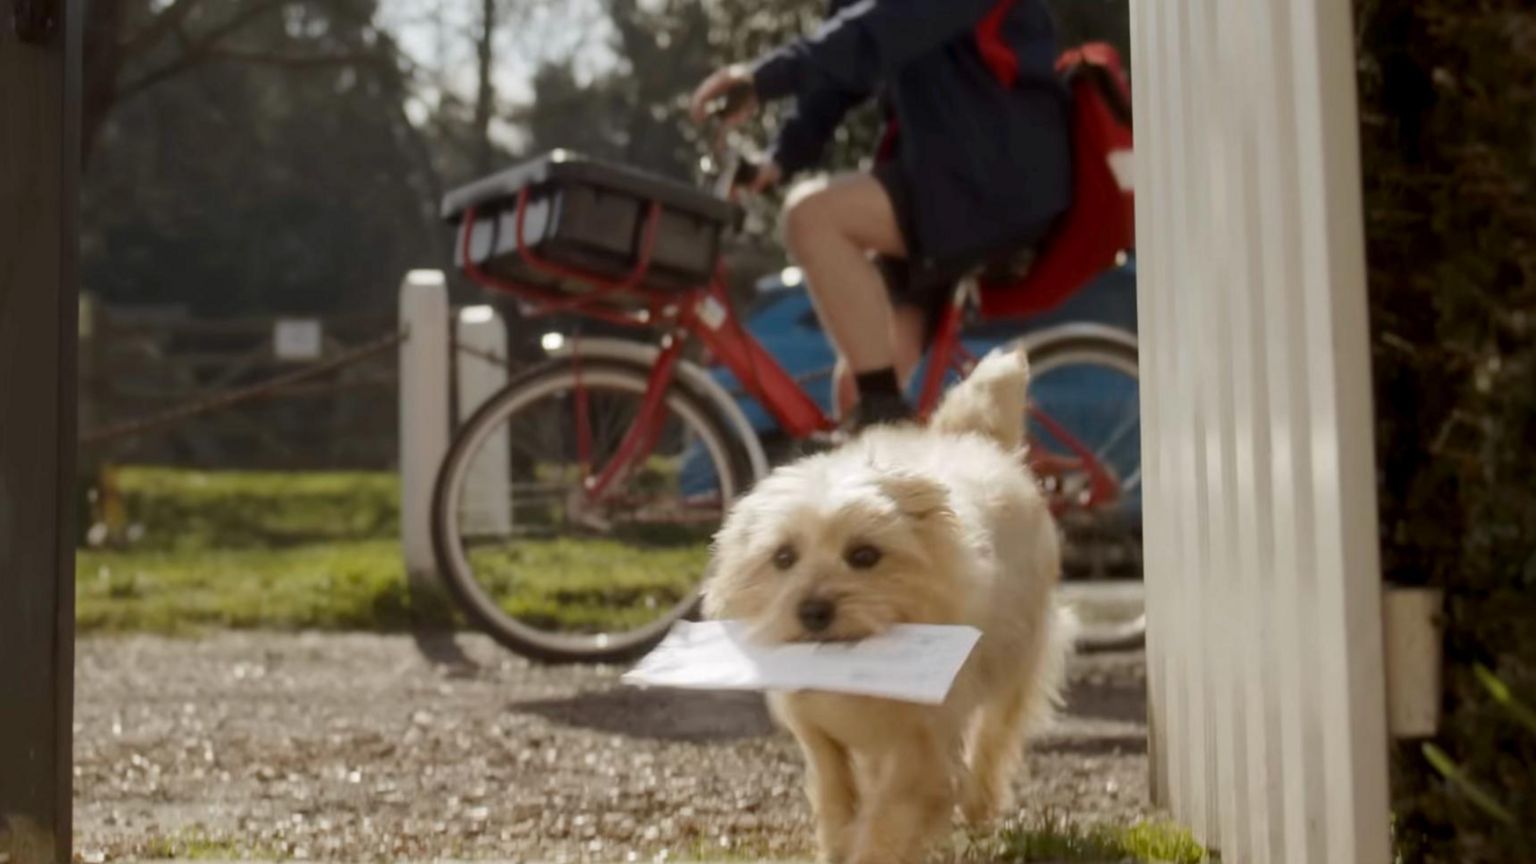 Winnie in the video carrying an envelope